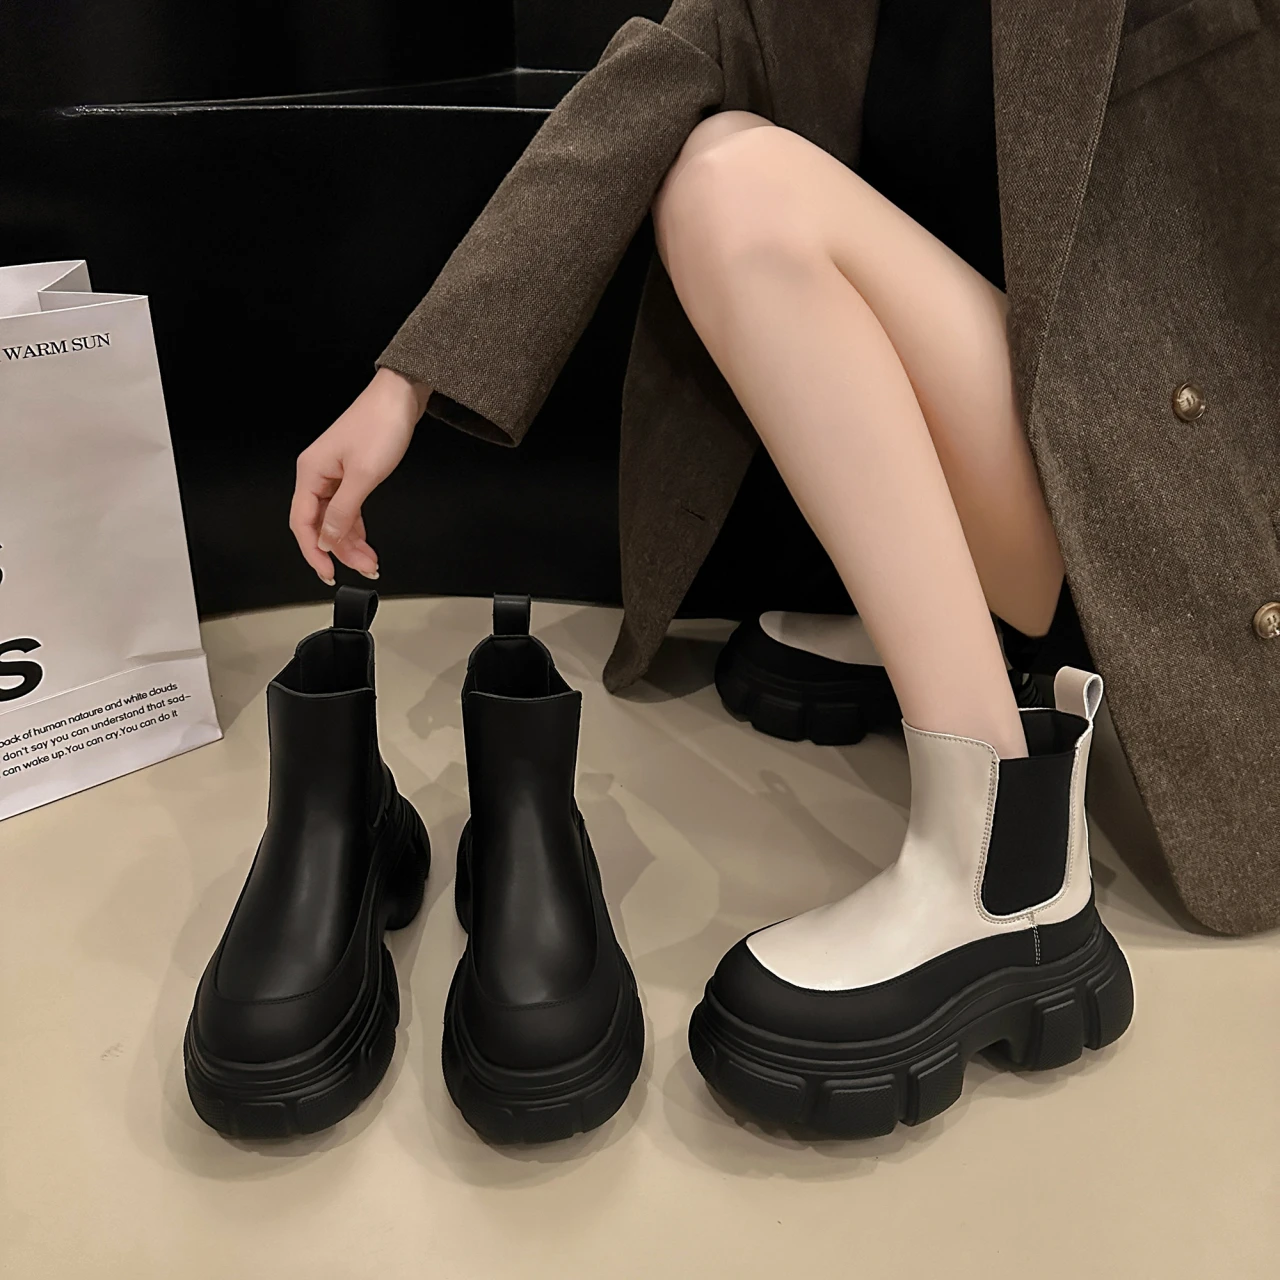 

Thick Soled Short Boots Spring/Autumn ANKLE Ankle Boots for Women Zapatos De Plataforma Mujer Moda Platform Shoes Goth Shoes